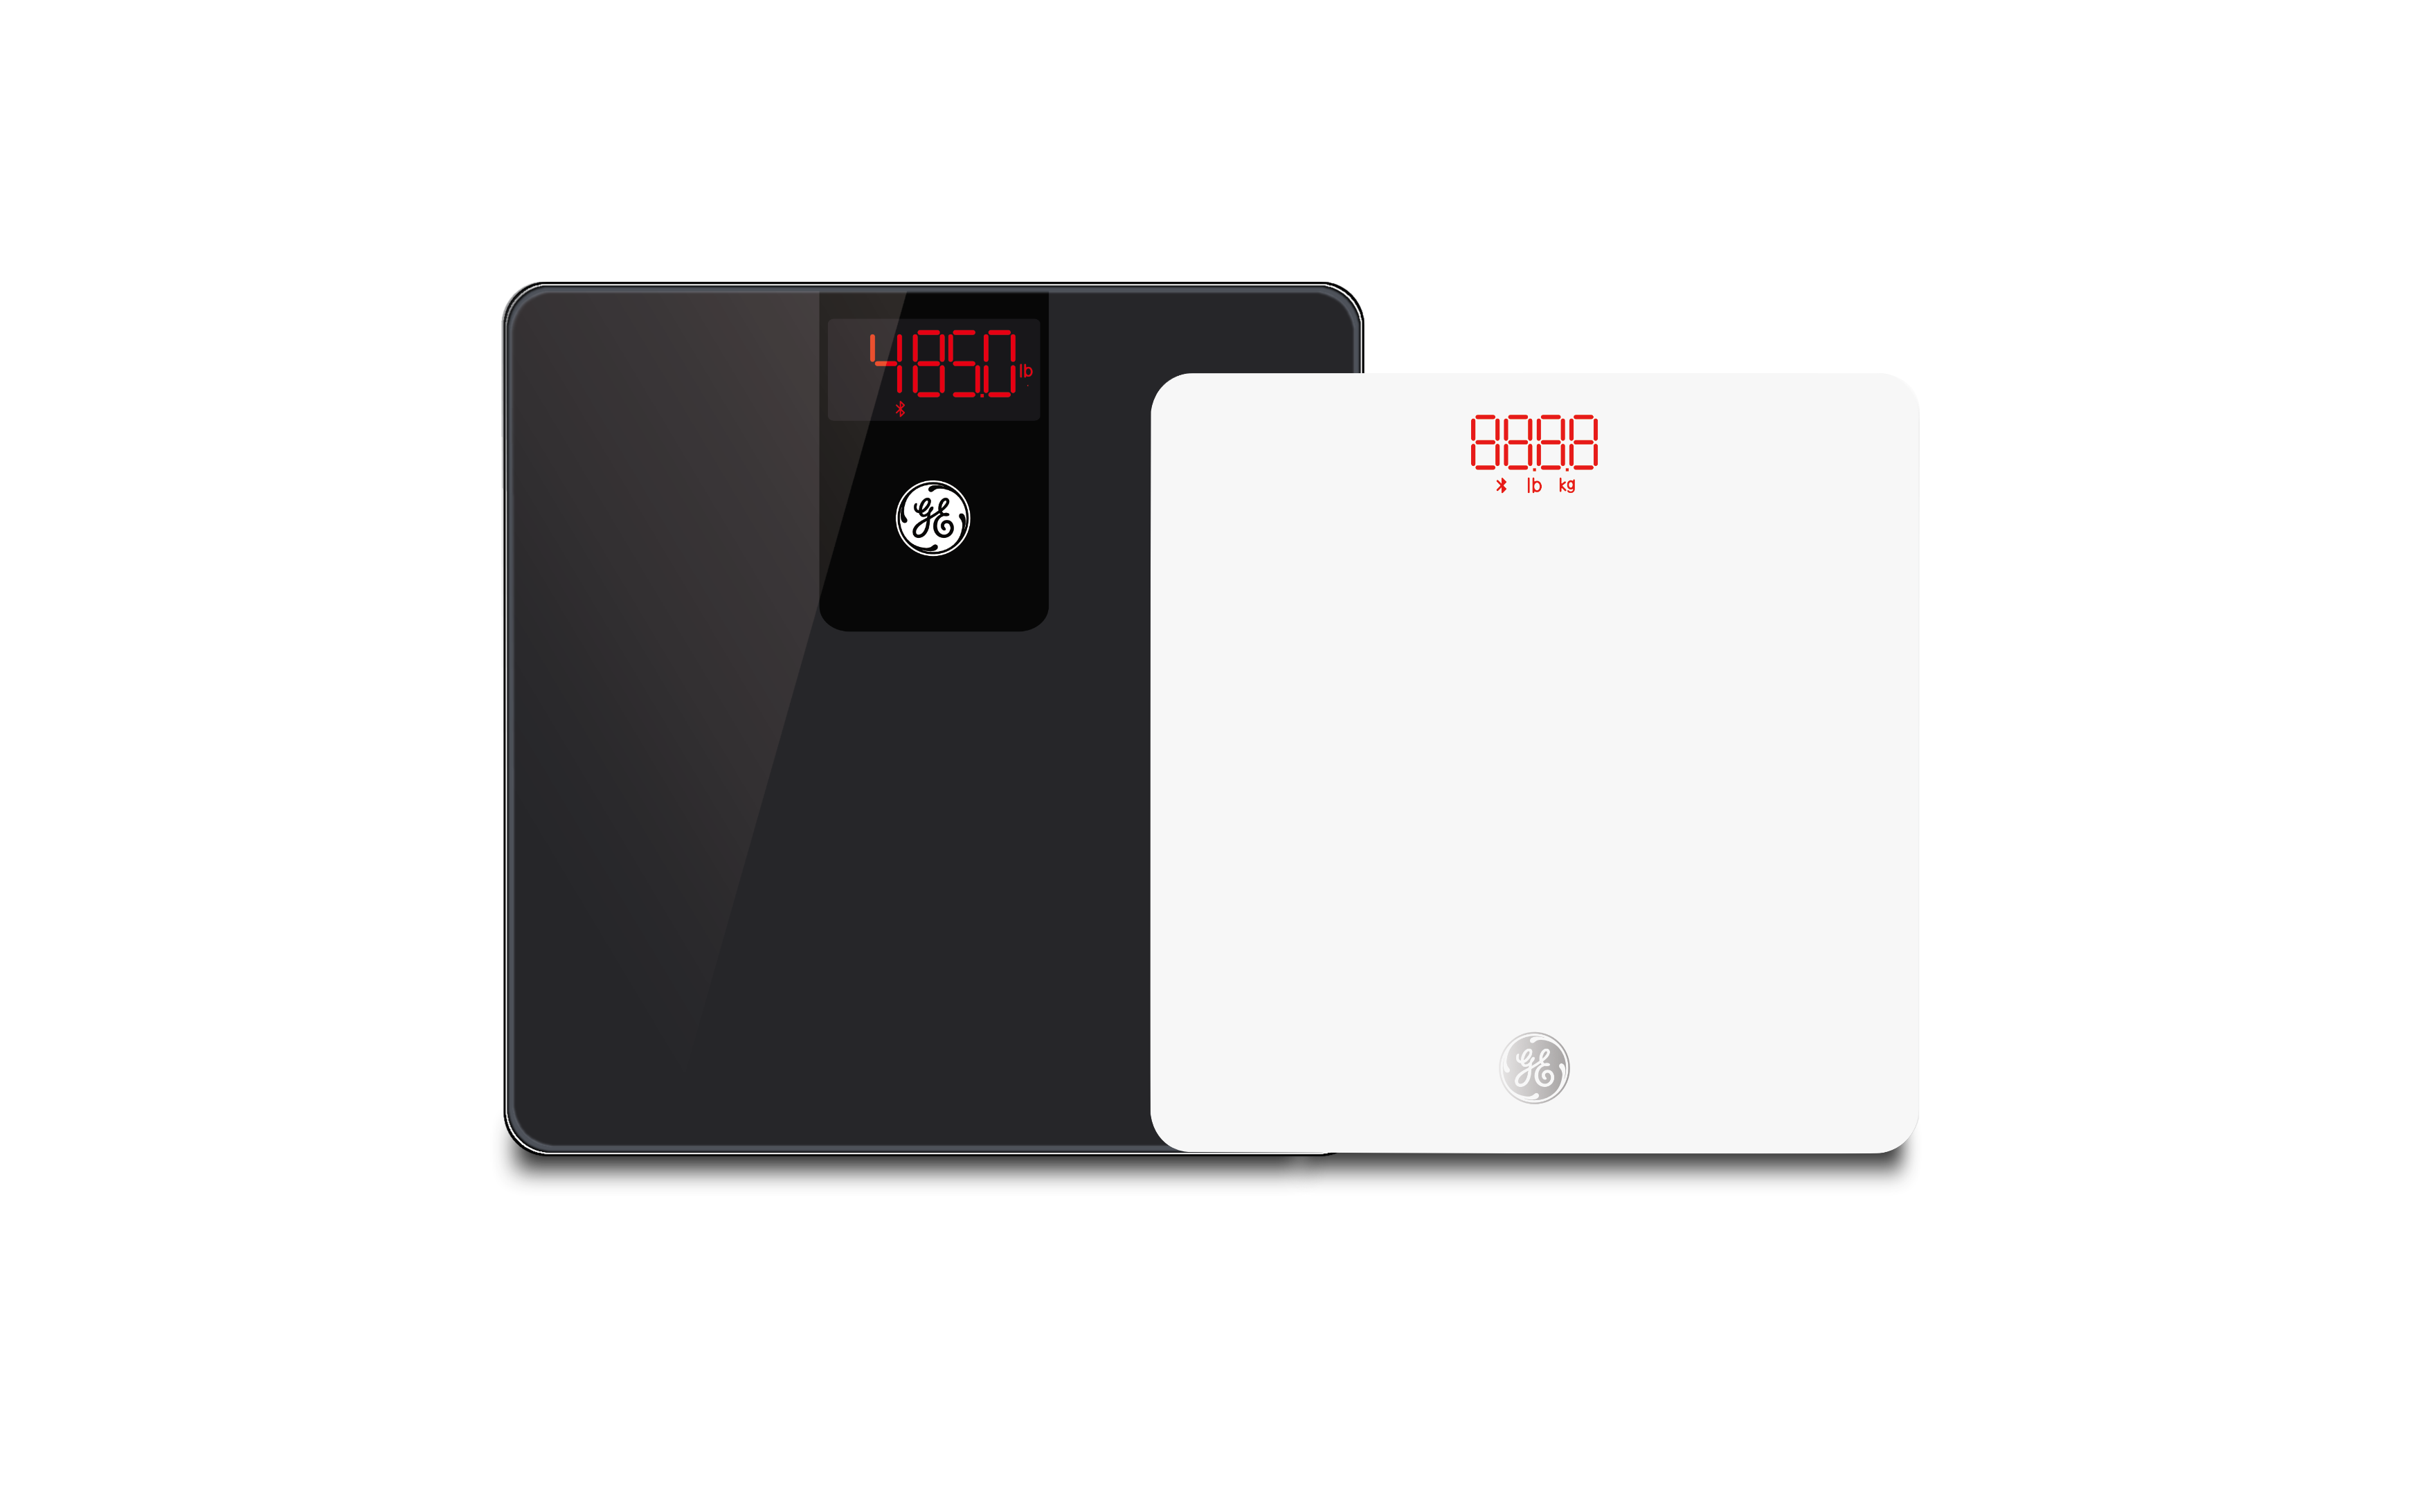 GE Smart Scale: GE Fit Plus Body Fat Scale the latest in GE Fit series